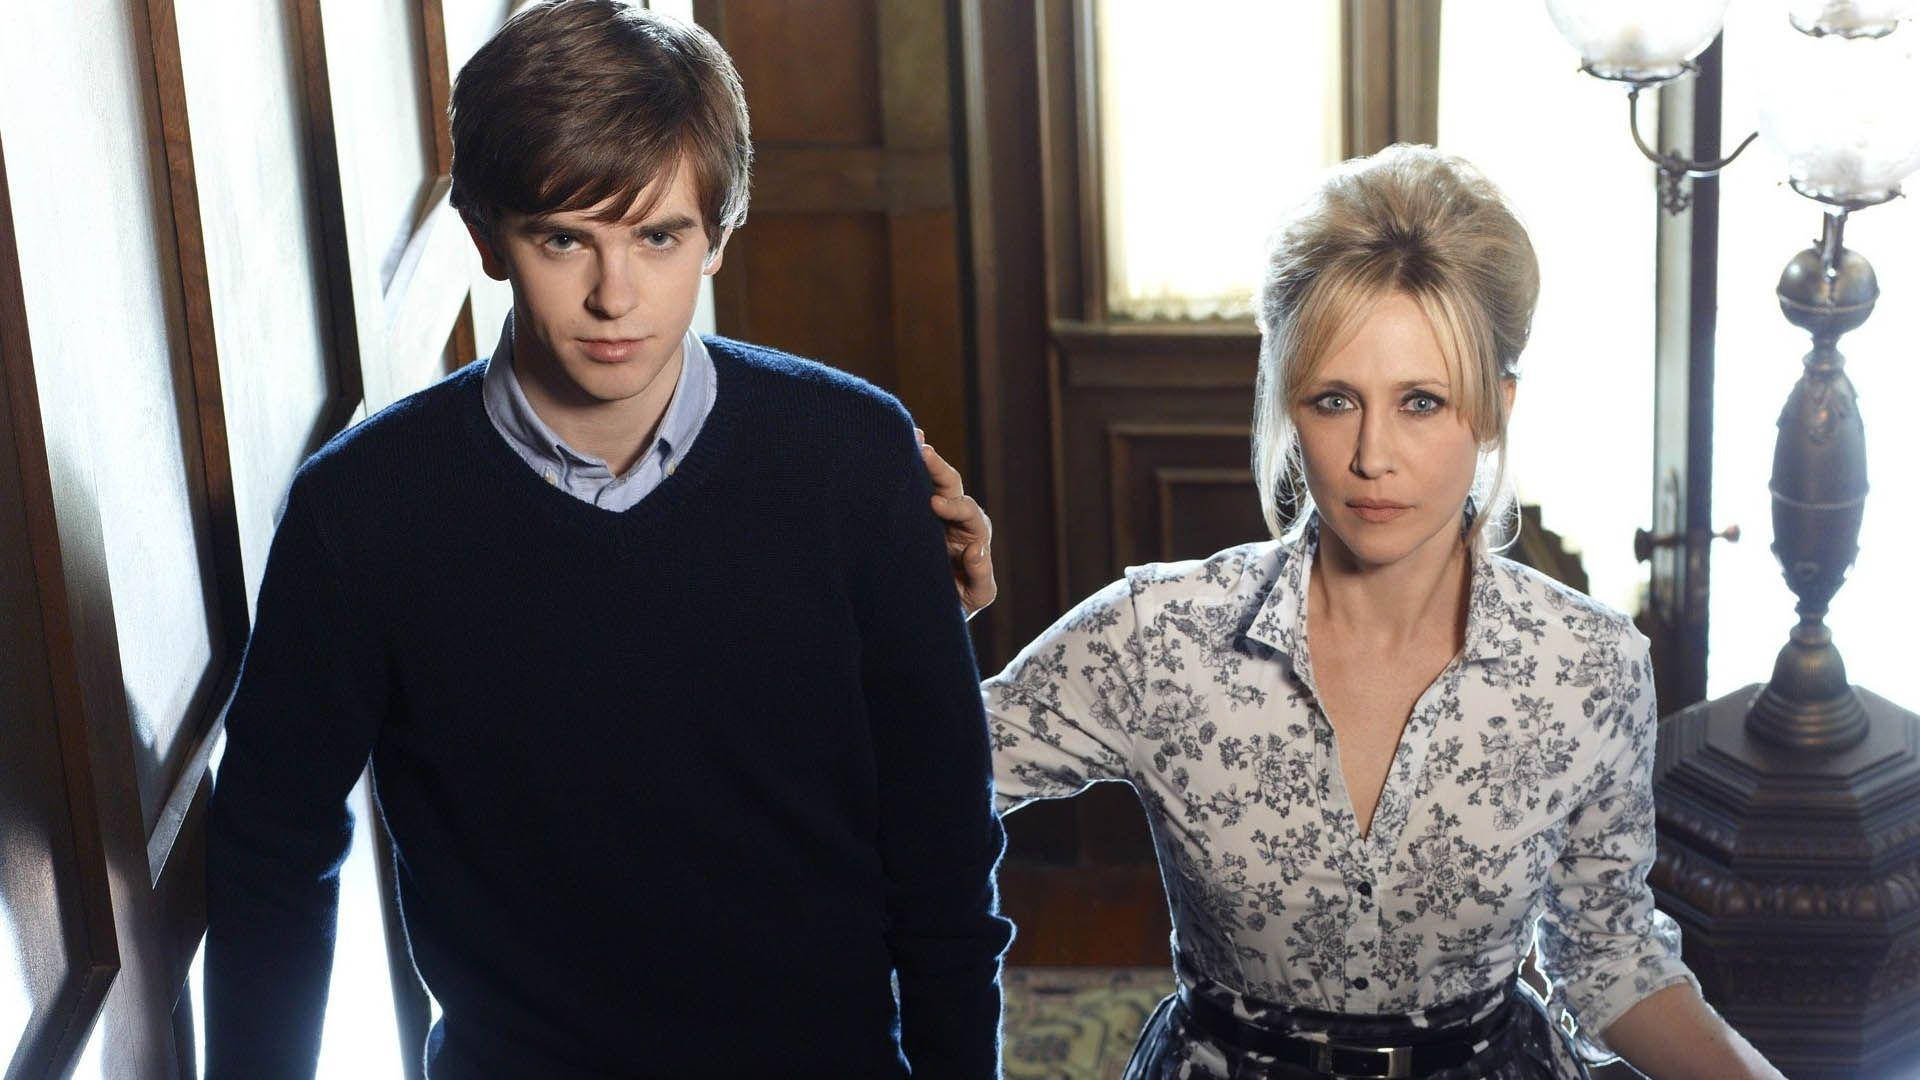 An Intimate Moment Between Norma And Norman Bates In Bates Motel Tv Series